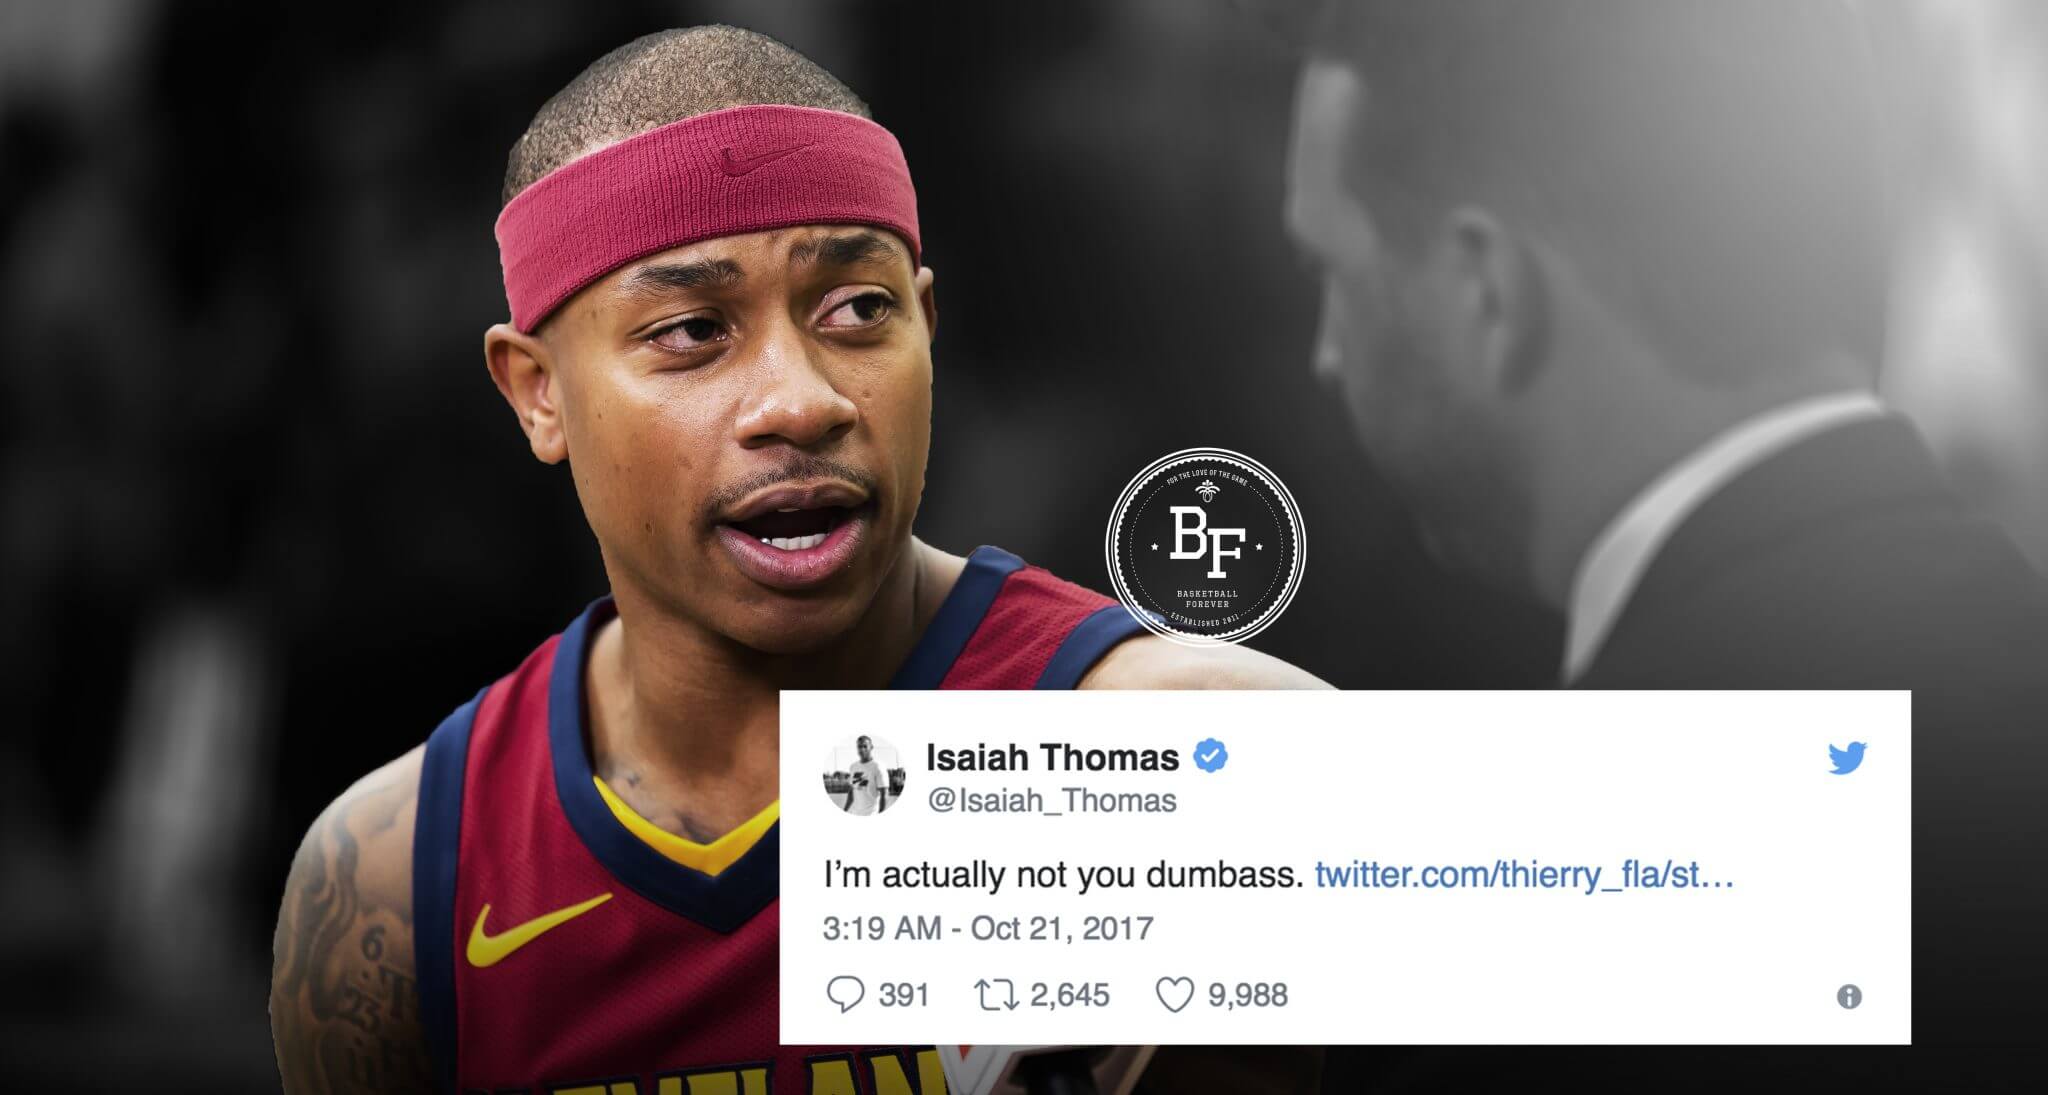 Just when you think Isaiah Thomas can't get any better, he does